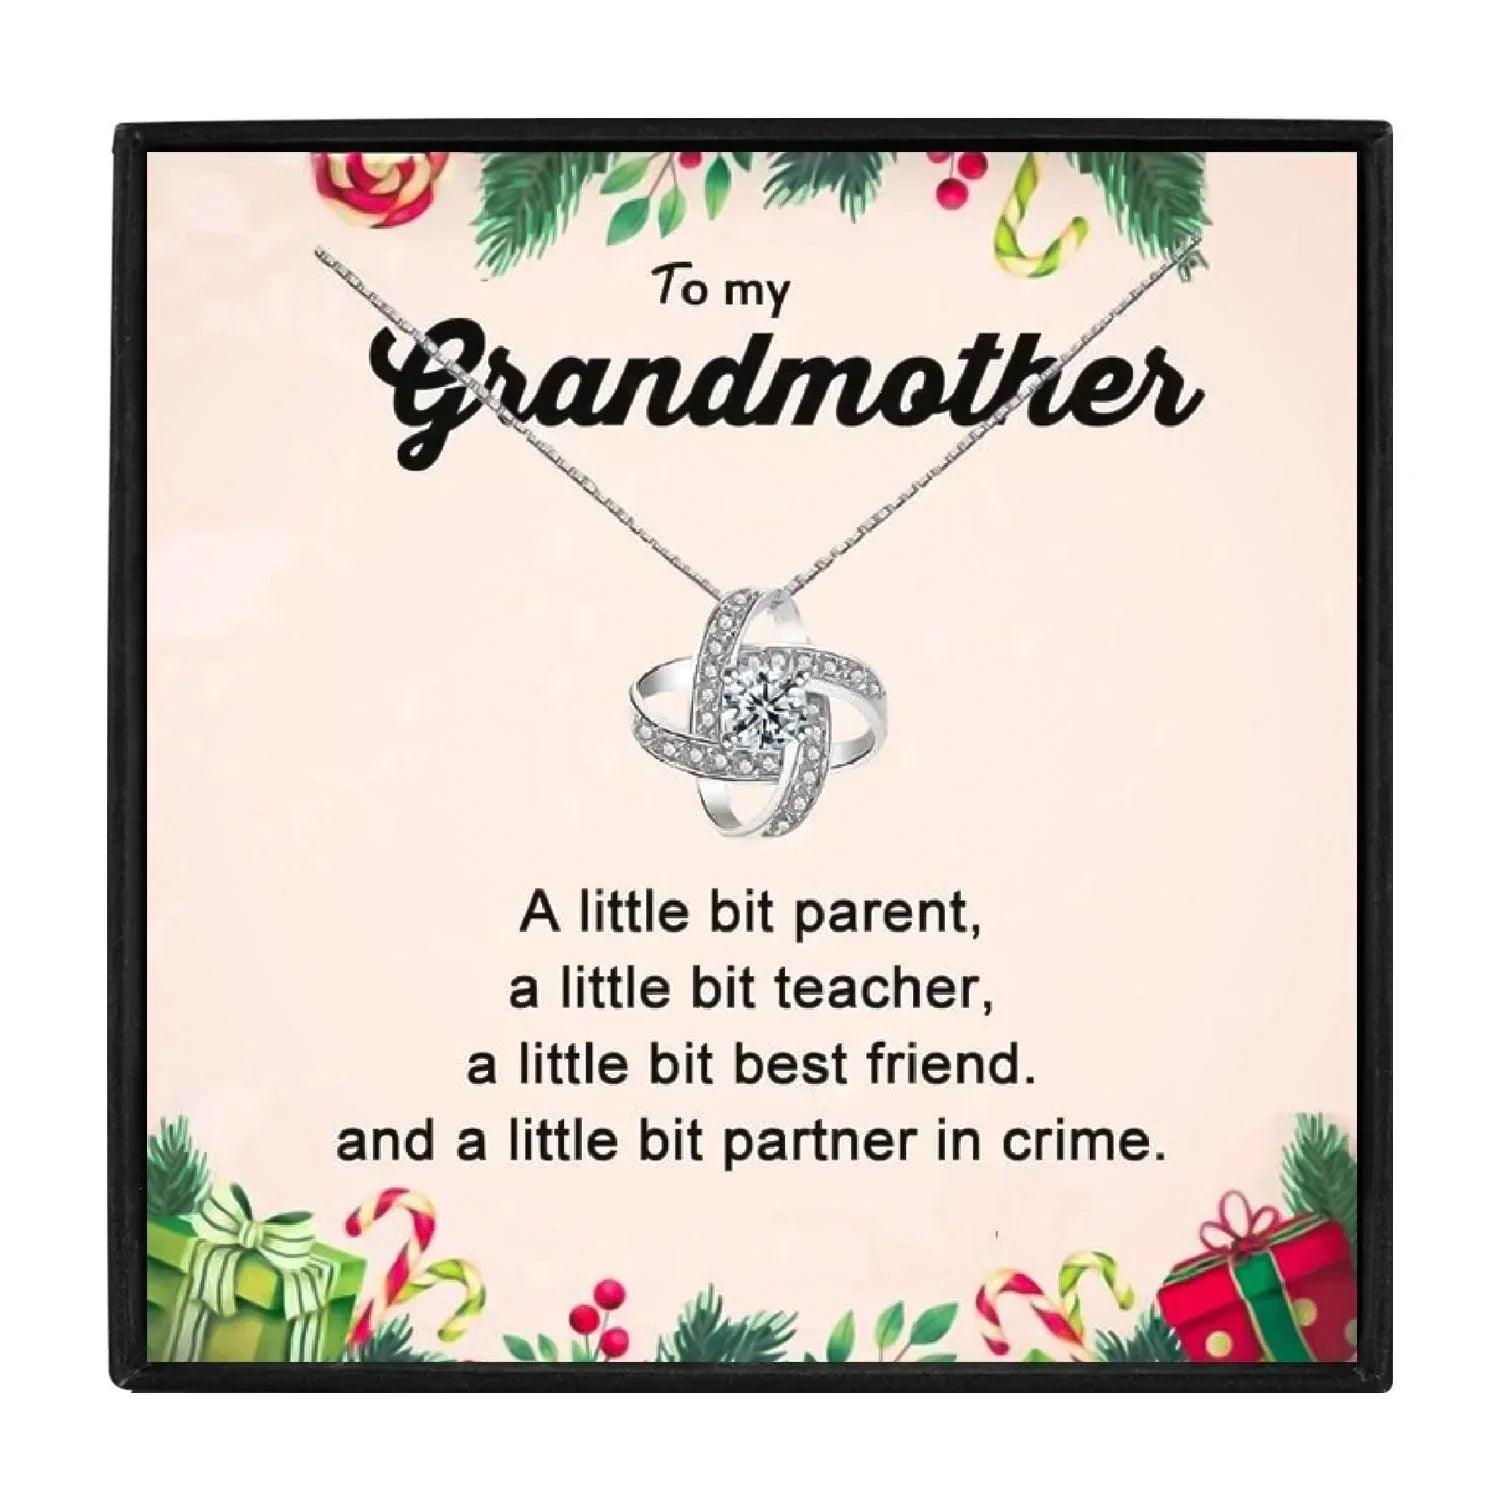 To My Grandma Love Knot Pendant Necklace Gift for Christmas 2023 | To My Grandma Love Knot Pendant Necklace Gift - undefined | Grandma gift ideas, Grandma Gifts, Grandma necklaces | From Hunny Life | hunnylife.com